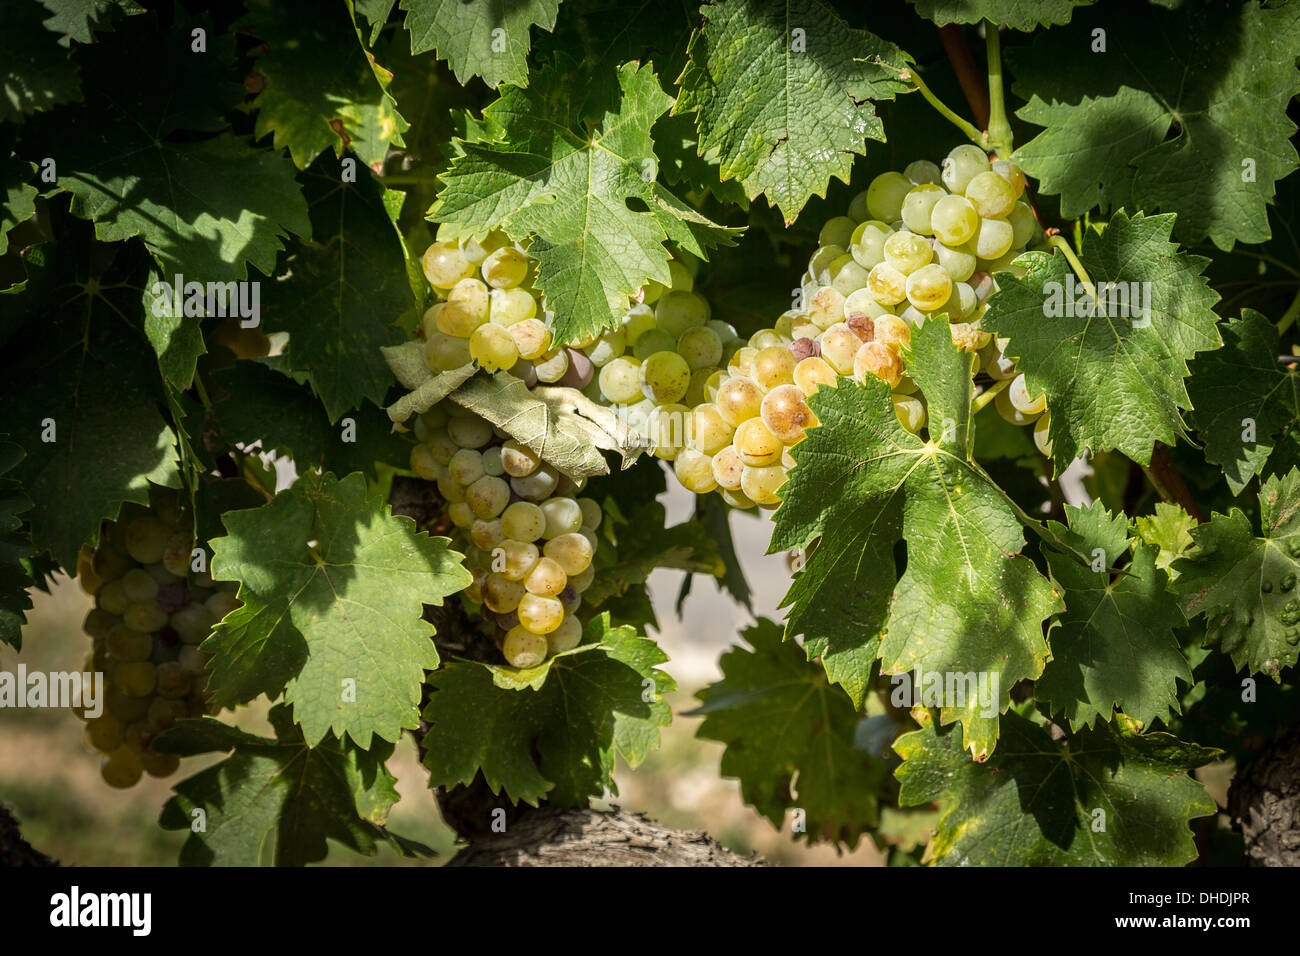 Muscat grapes in Beaumes de Venise, France. Stock Photo